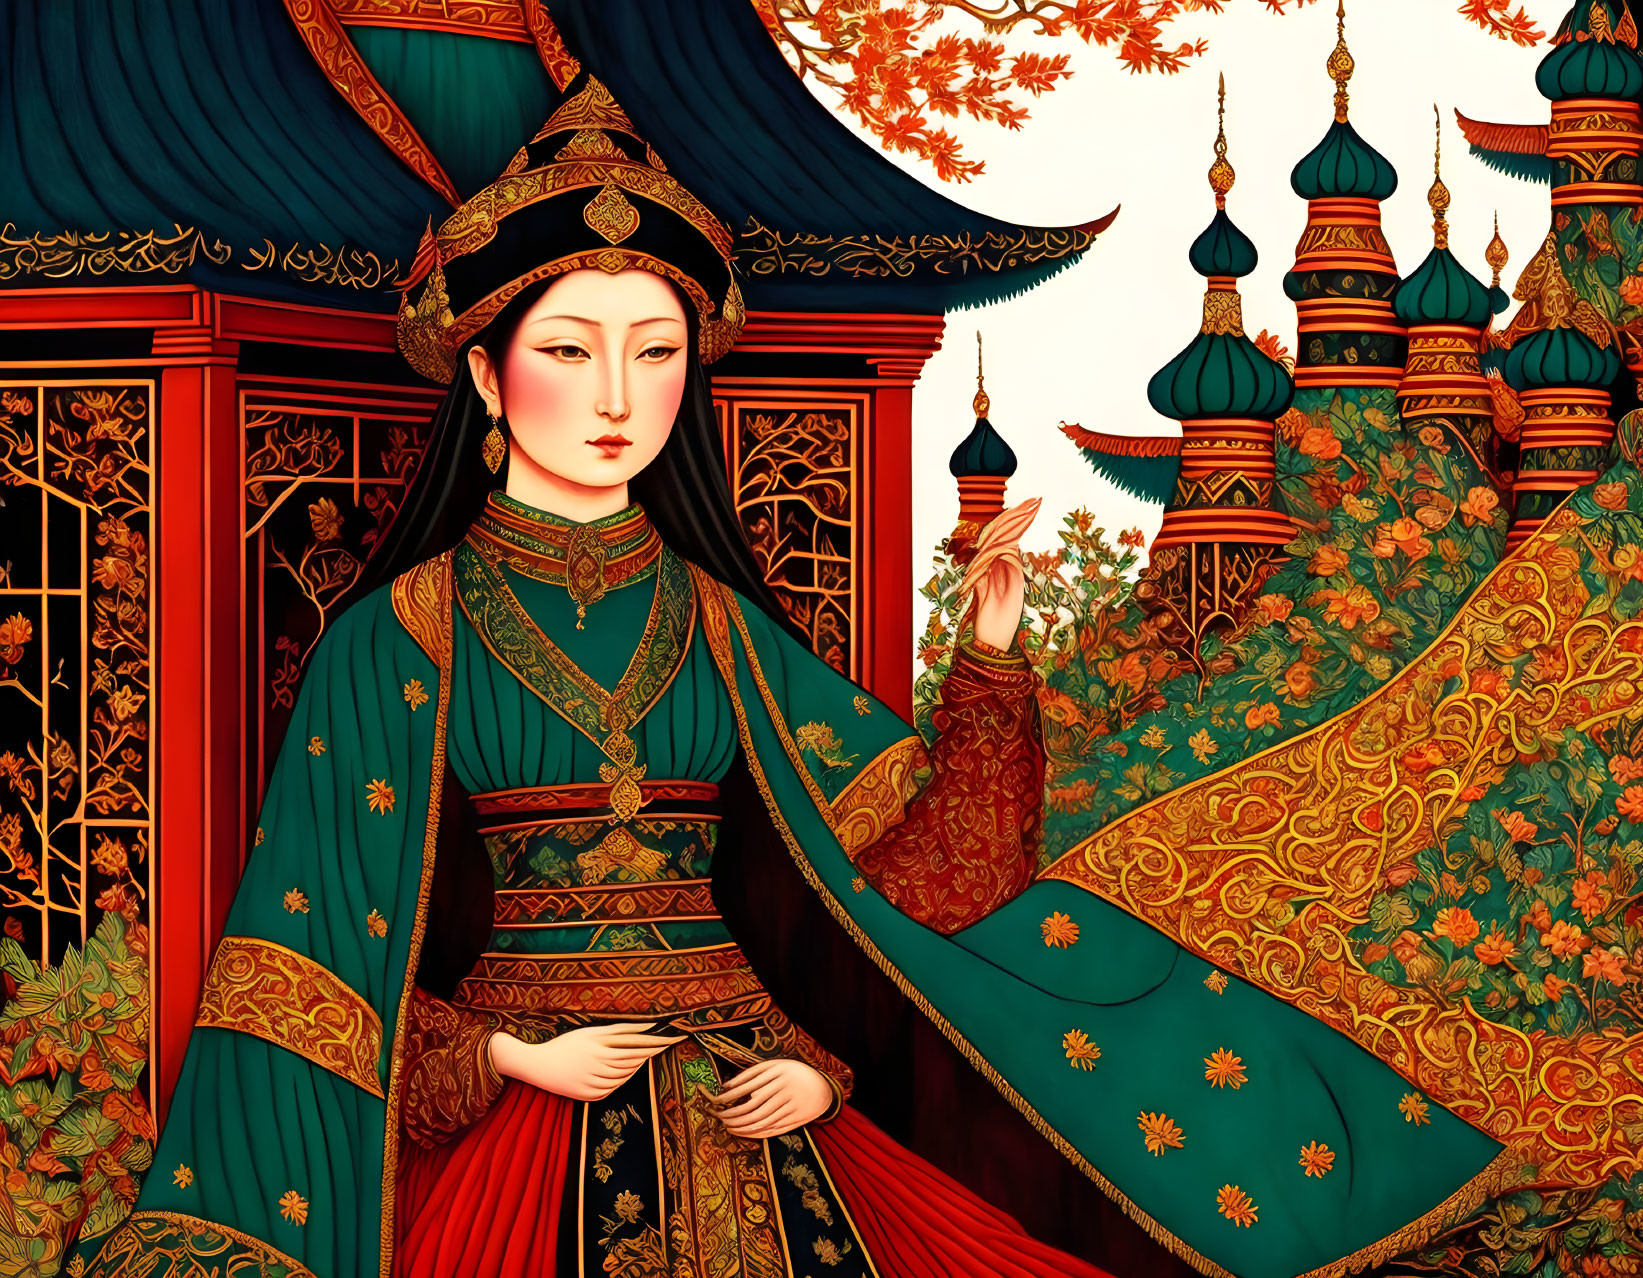 Traditional Chinese Attire Woman Illustration at Autumn Temple